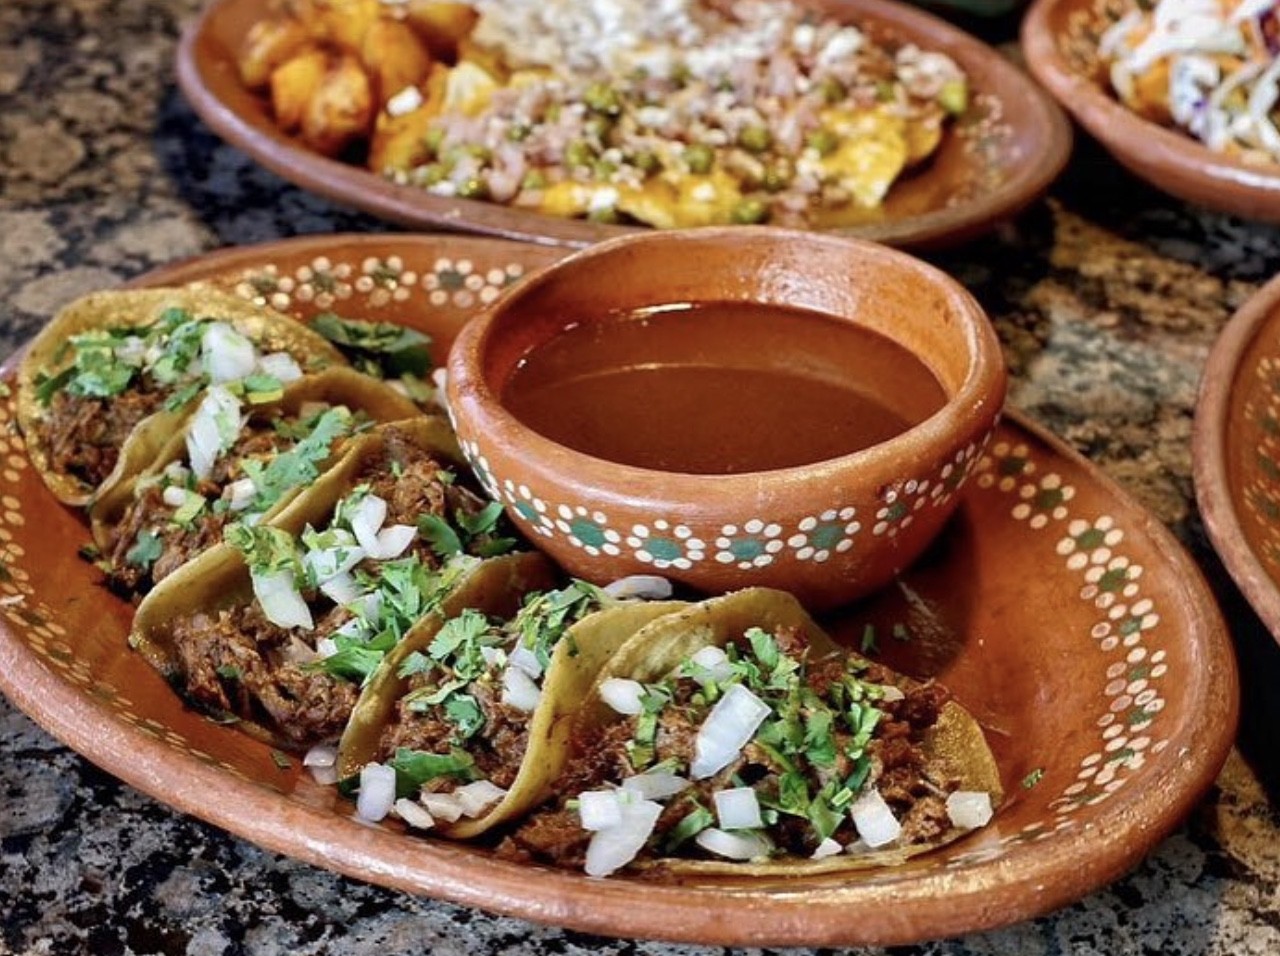 Tlahco Mexican Kitchen – Stone Oak
1662 Encino Rio, Suite 100
Tlahco Mexican Kitchen closed its Stone Oak location at the very end of 2023. The north San Antonio outpost first opened in January 2022. Tlahco’s flagship location at 6702 San Pedro Ave. remains open.